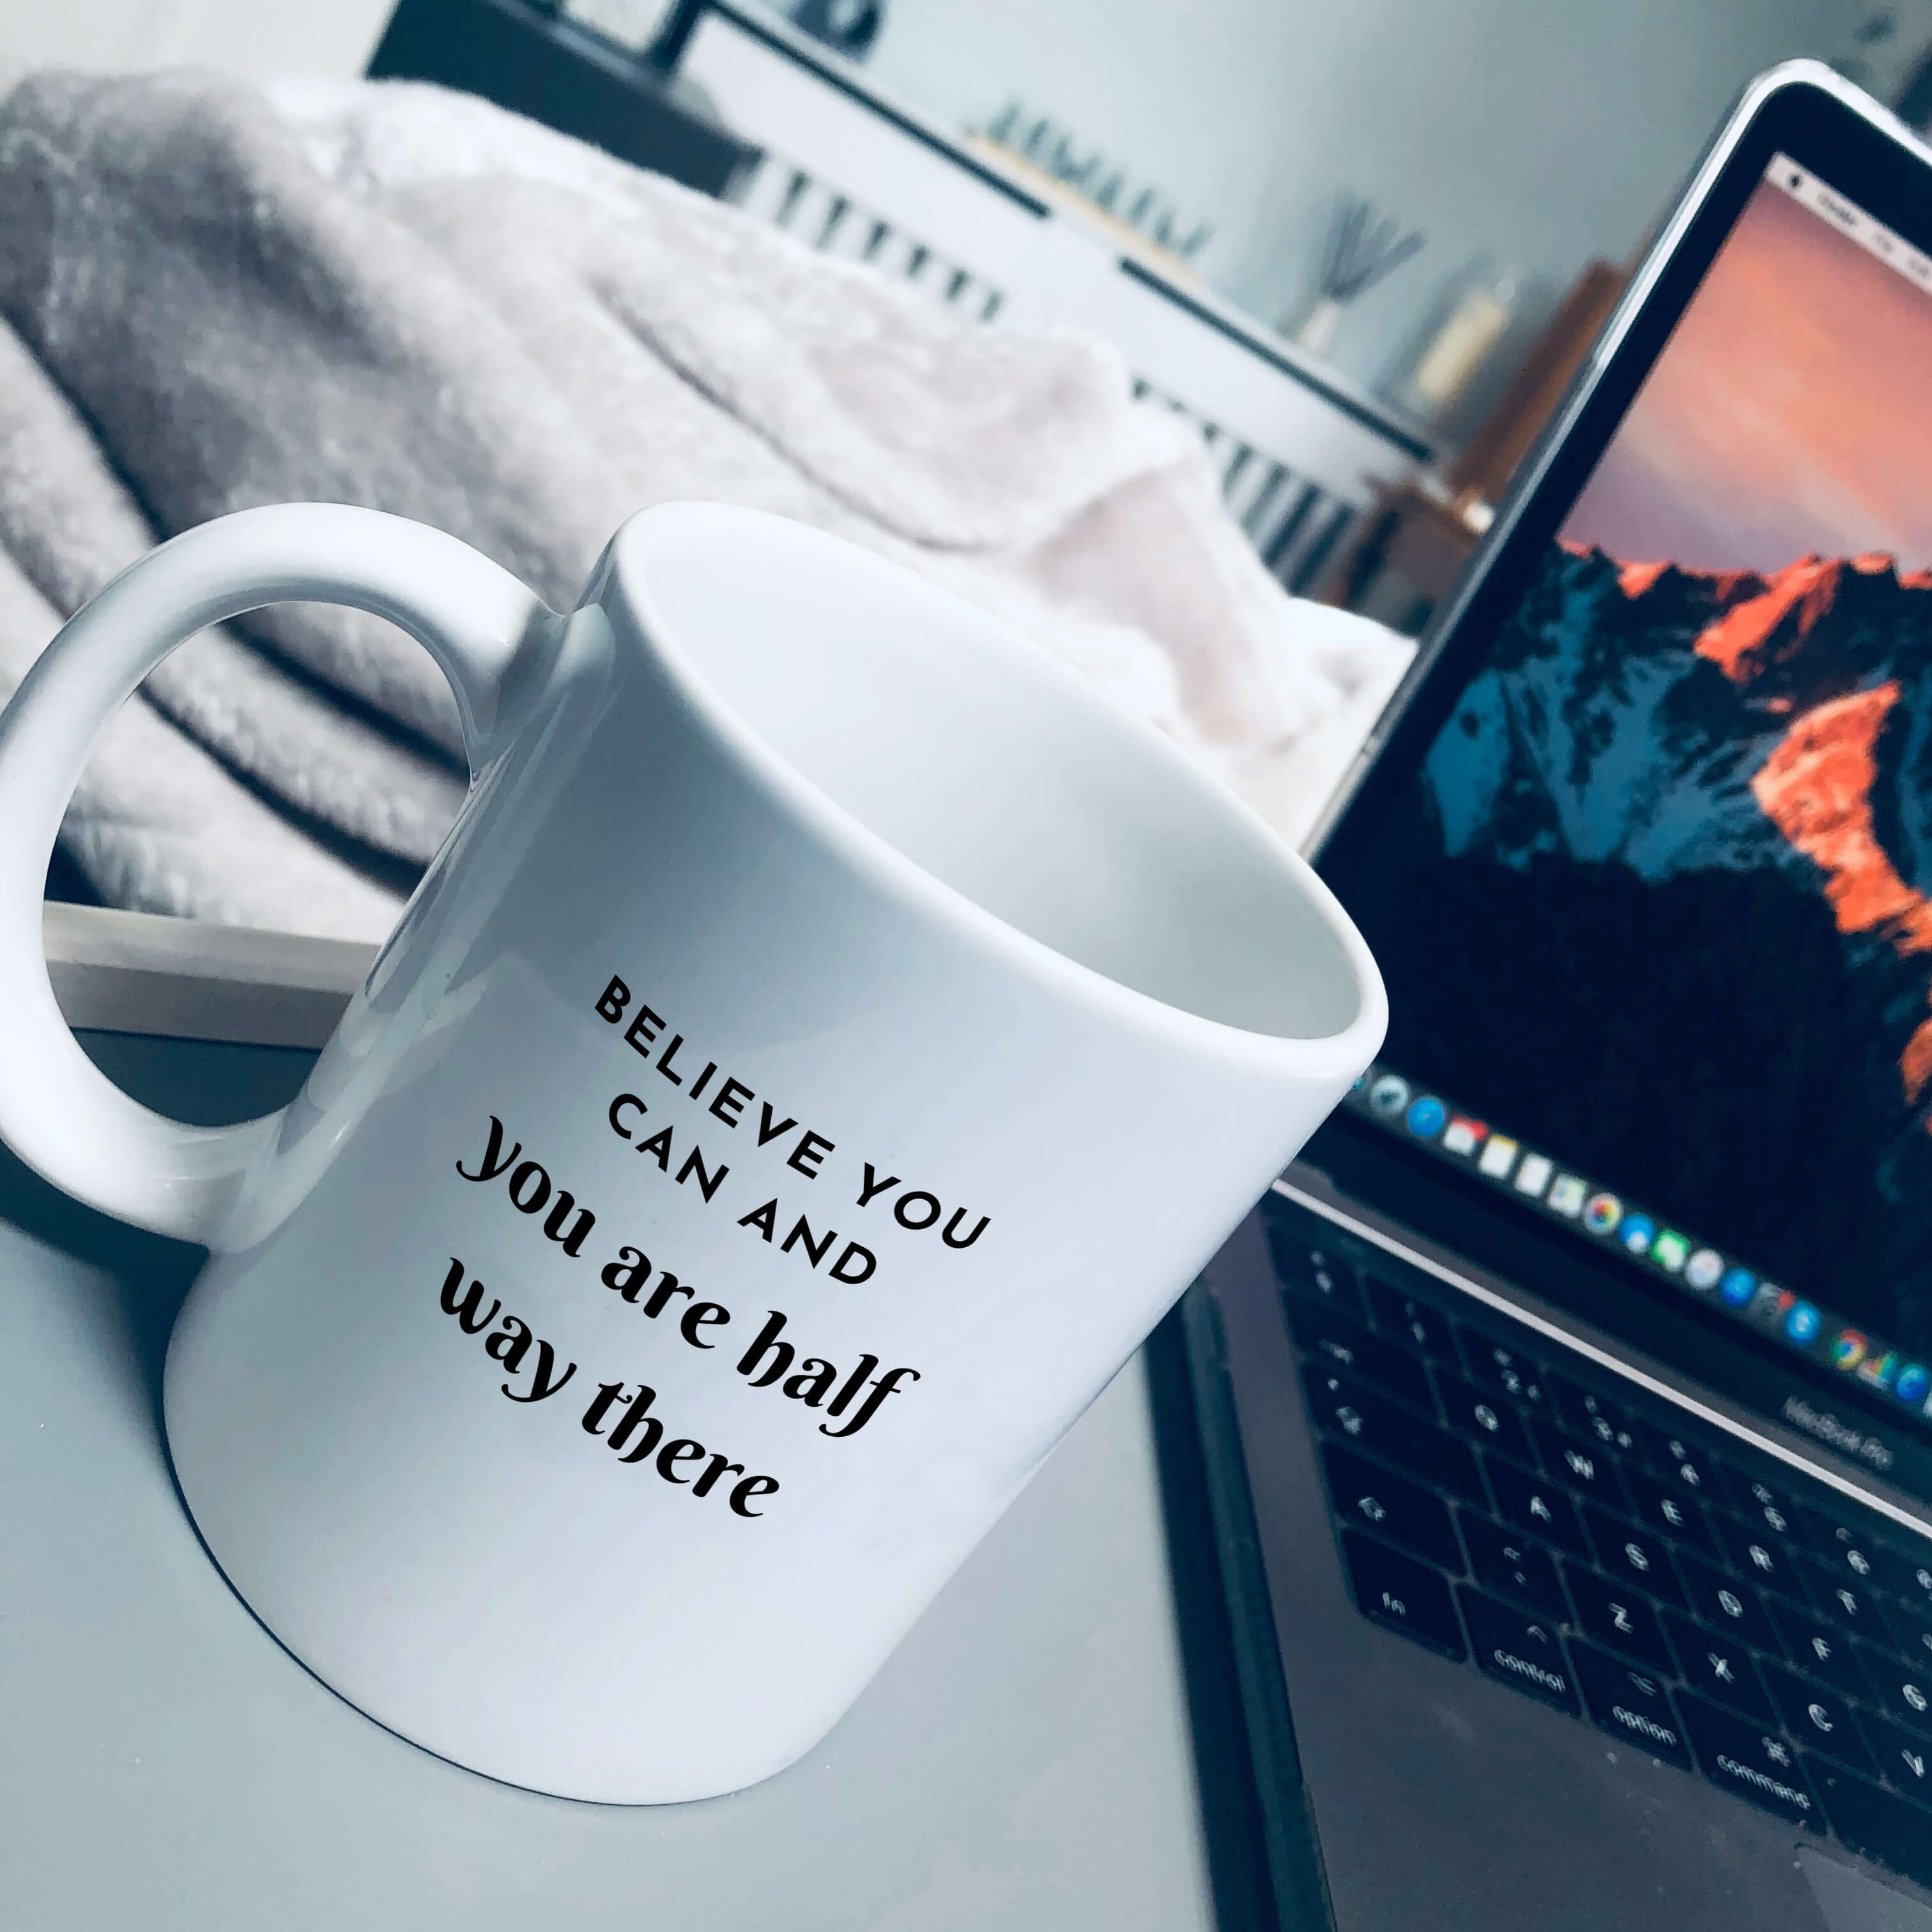 Mug on a tray table, with a laptop next to it. Mug reads: believe you can and you are half way there